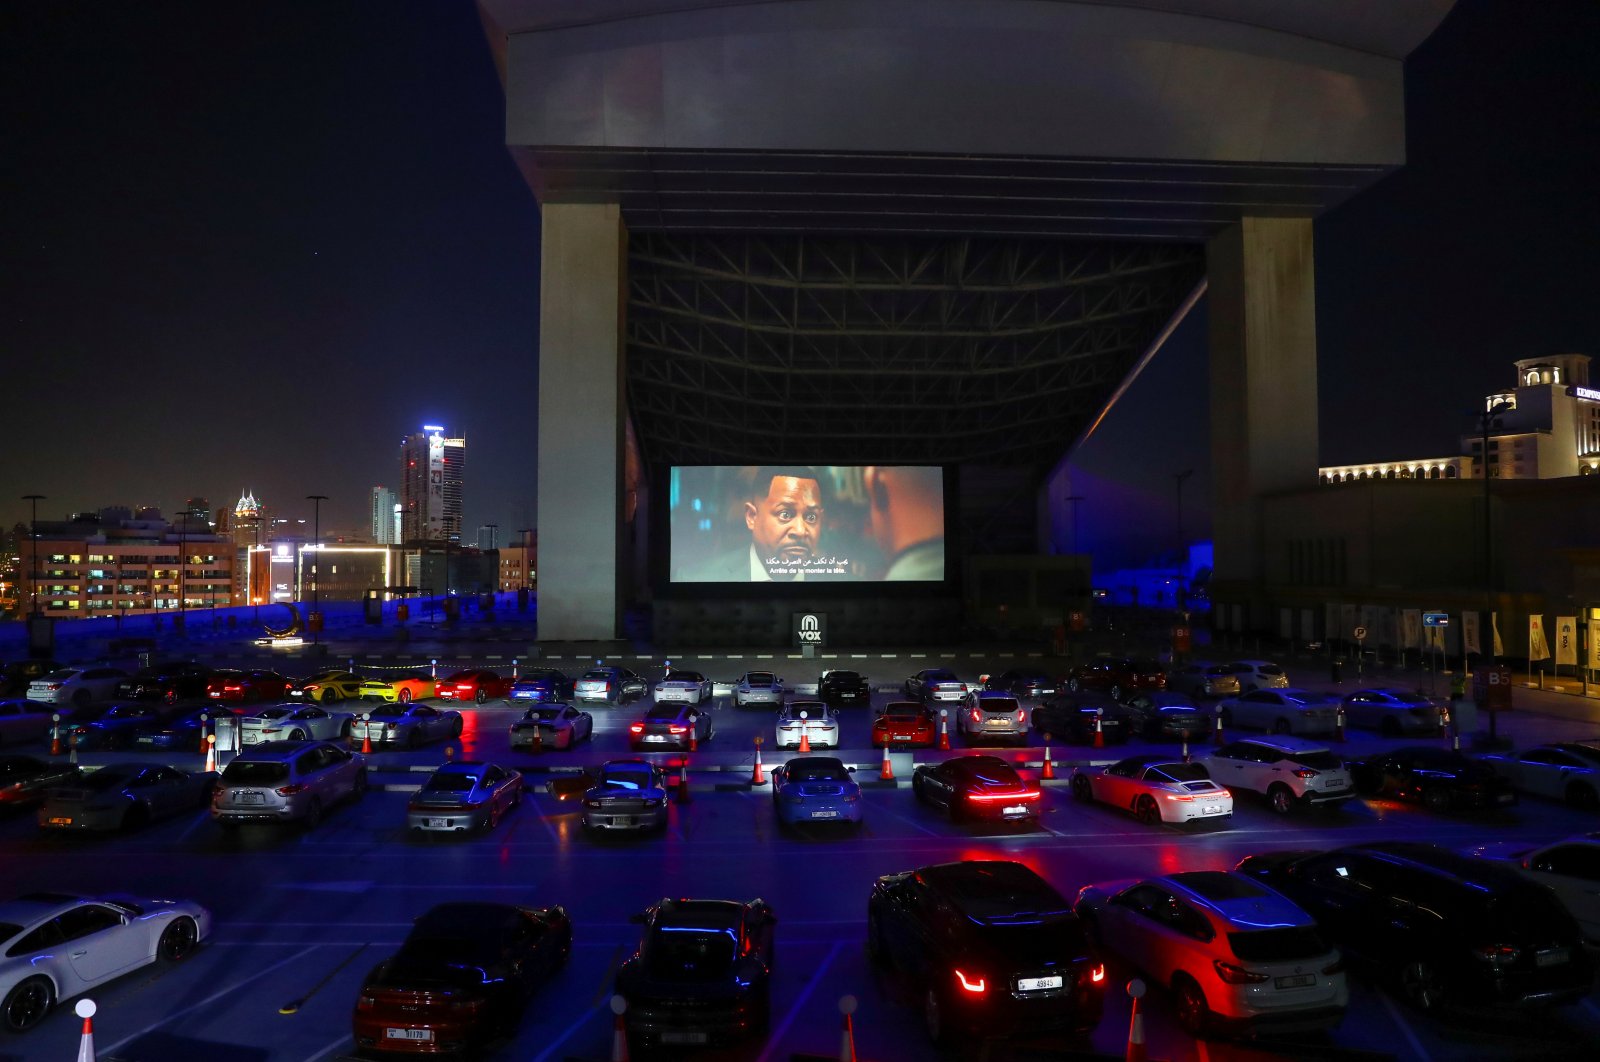 People sit in their cars watching a movie in a drive-in cinema at the Mall of the Emirates during the COVID-19 outbreak, in Dubai, the United Arab Emirates, May 13, 2020. (REUTERS Photo)